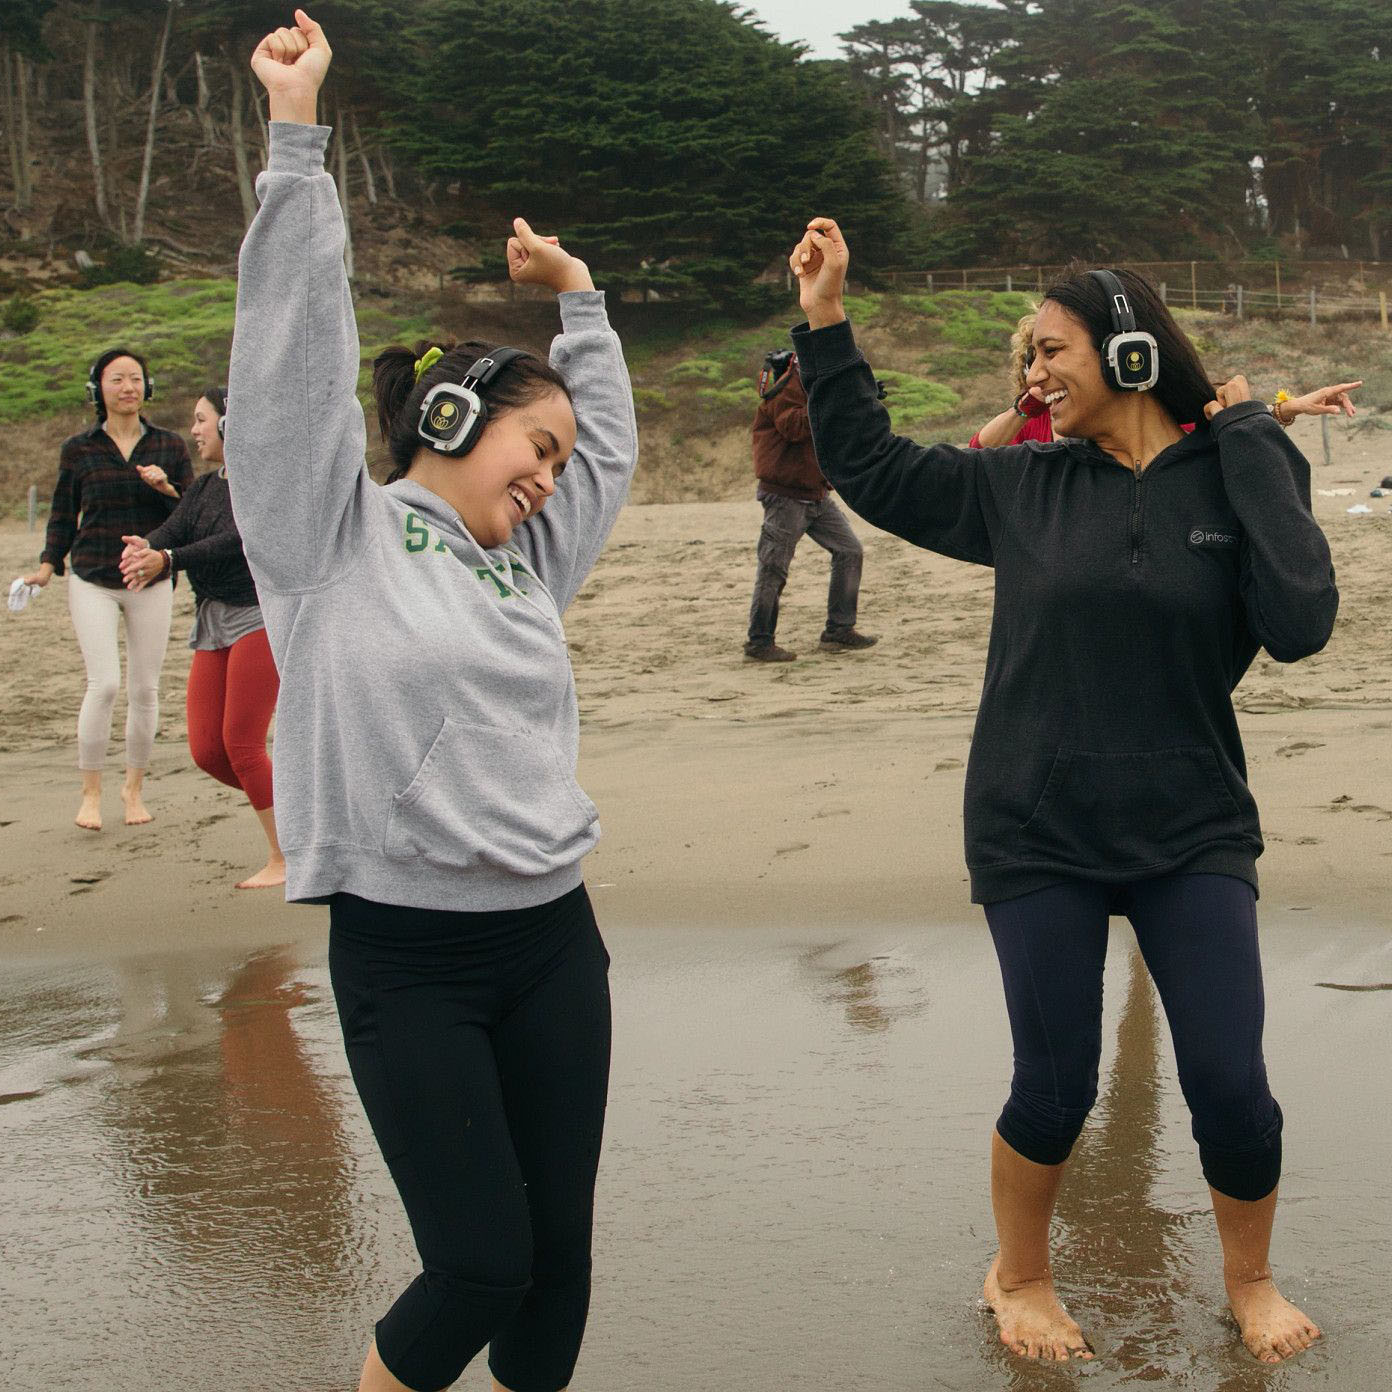 Two students dancing at baker beach with headphones on